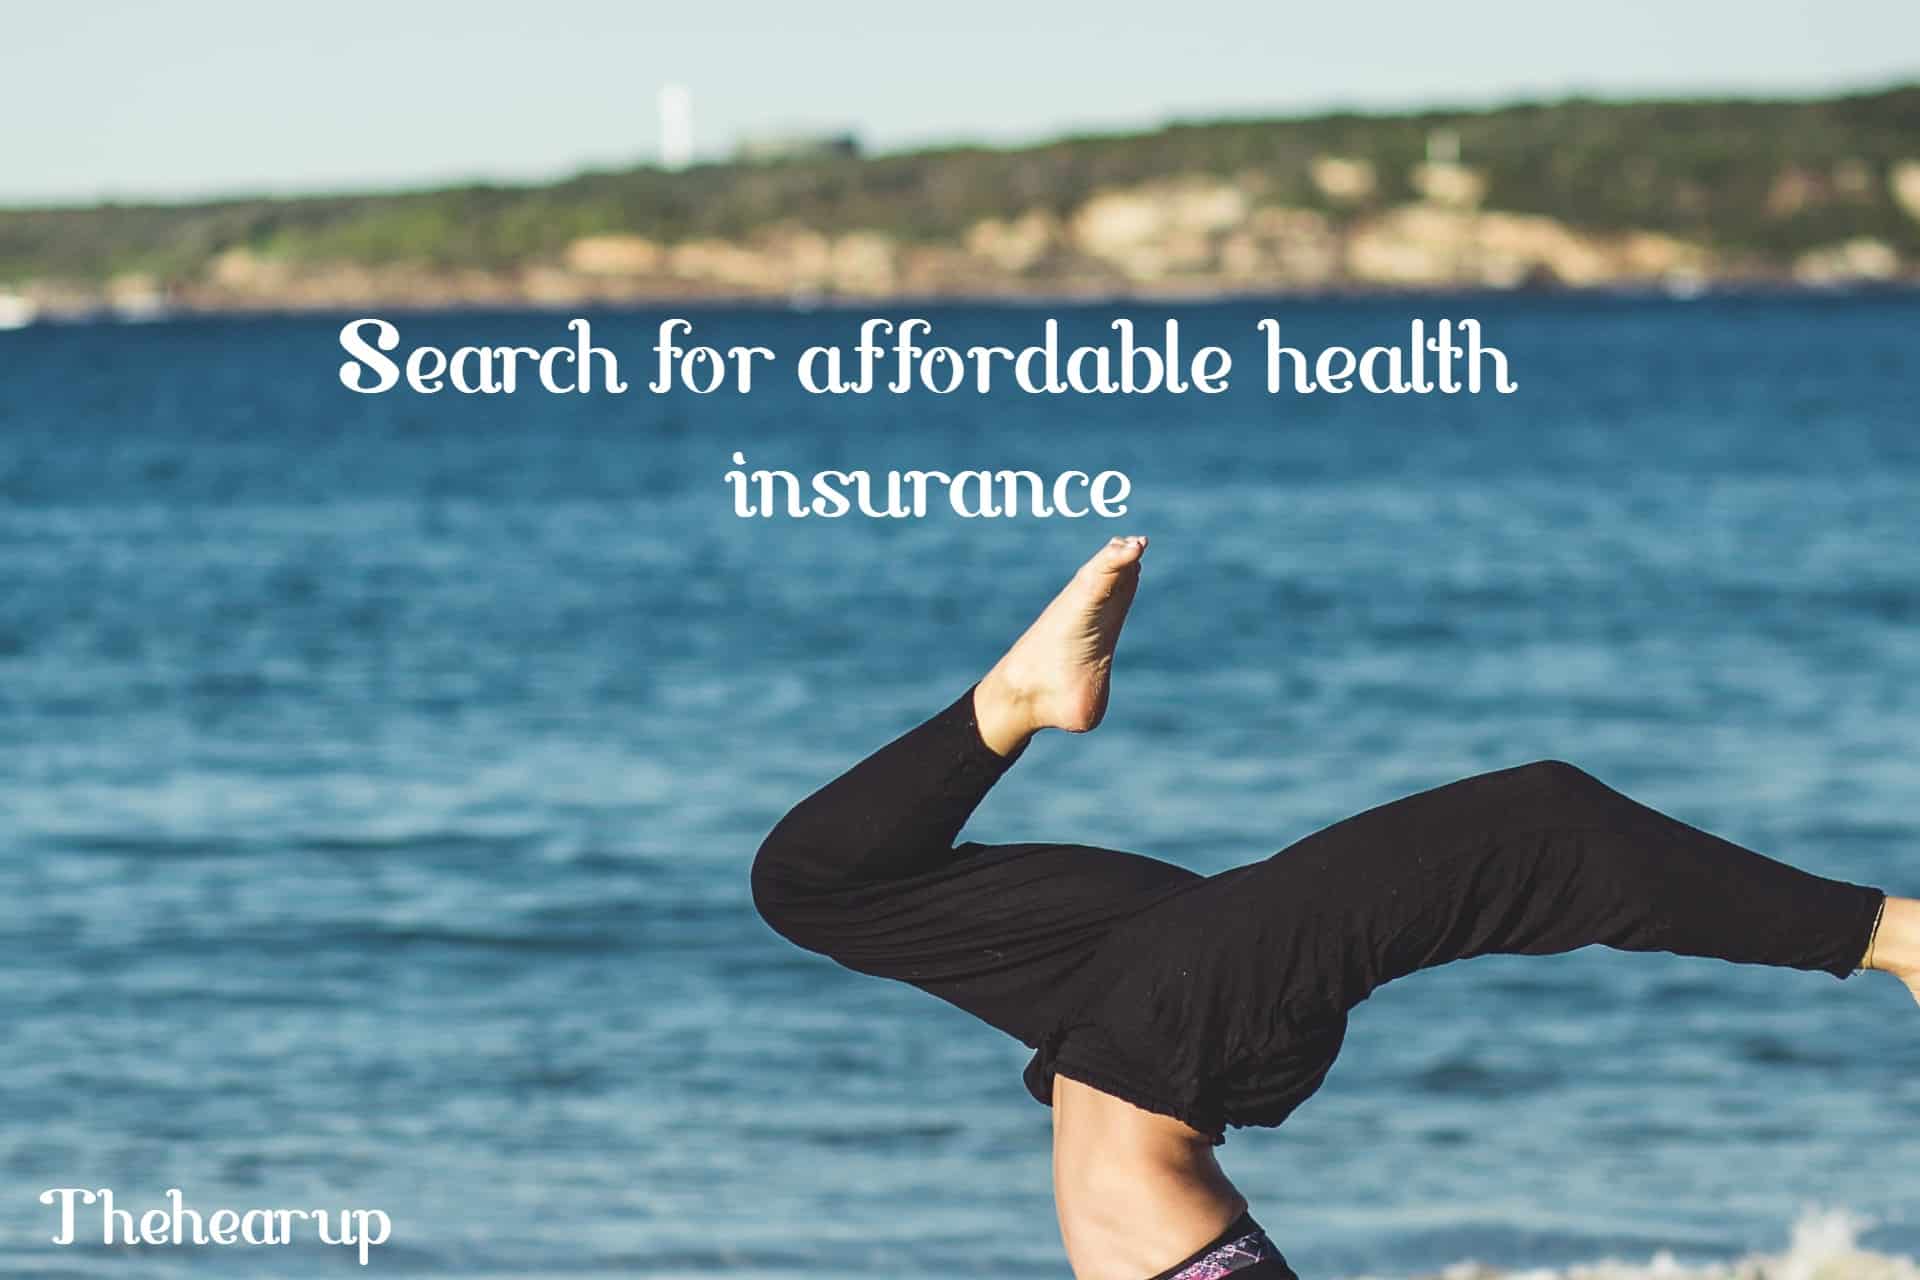 Search for affordable health insurance